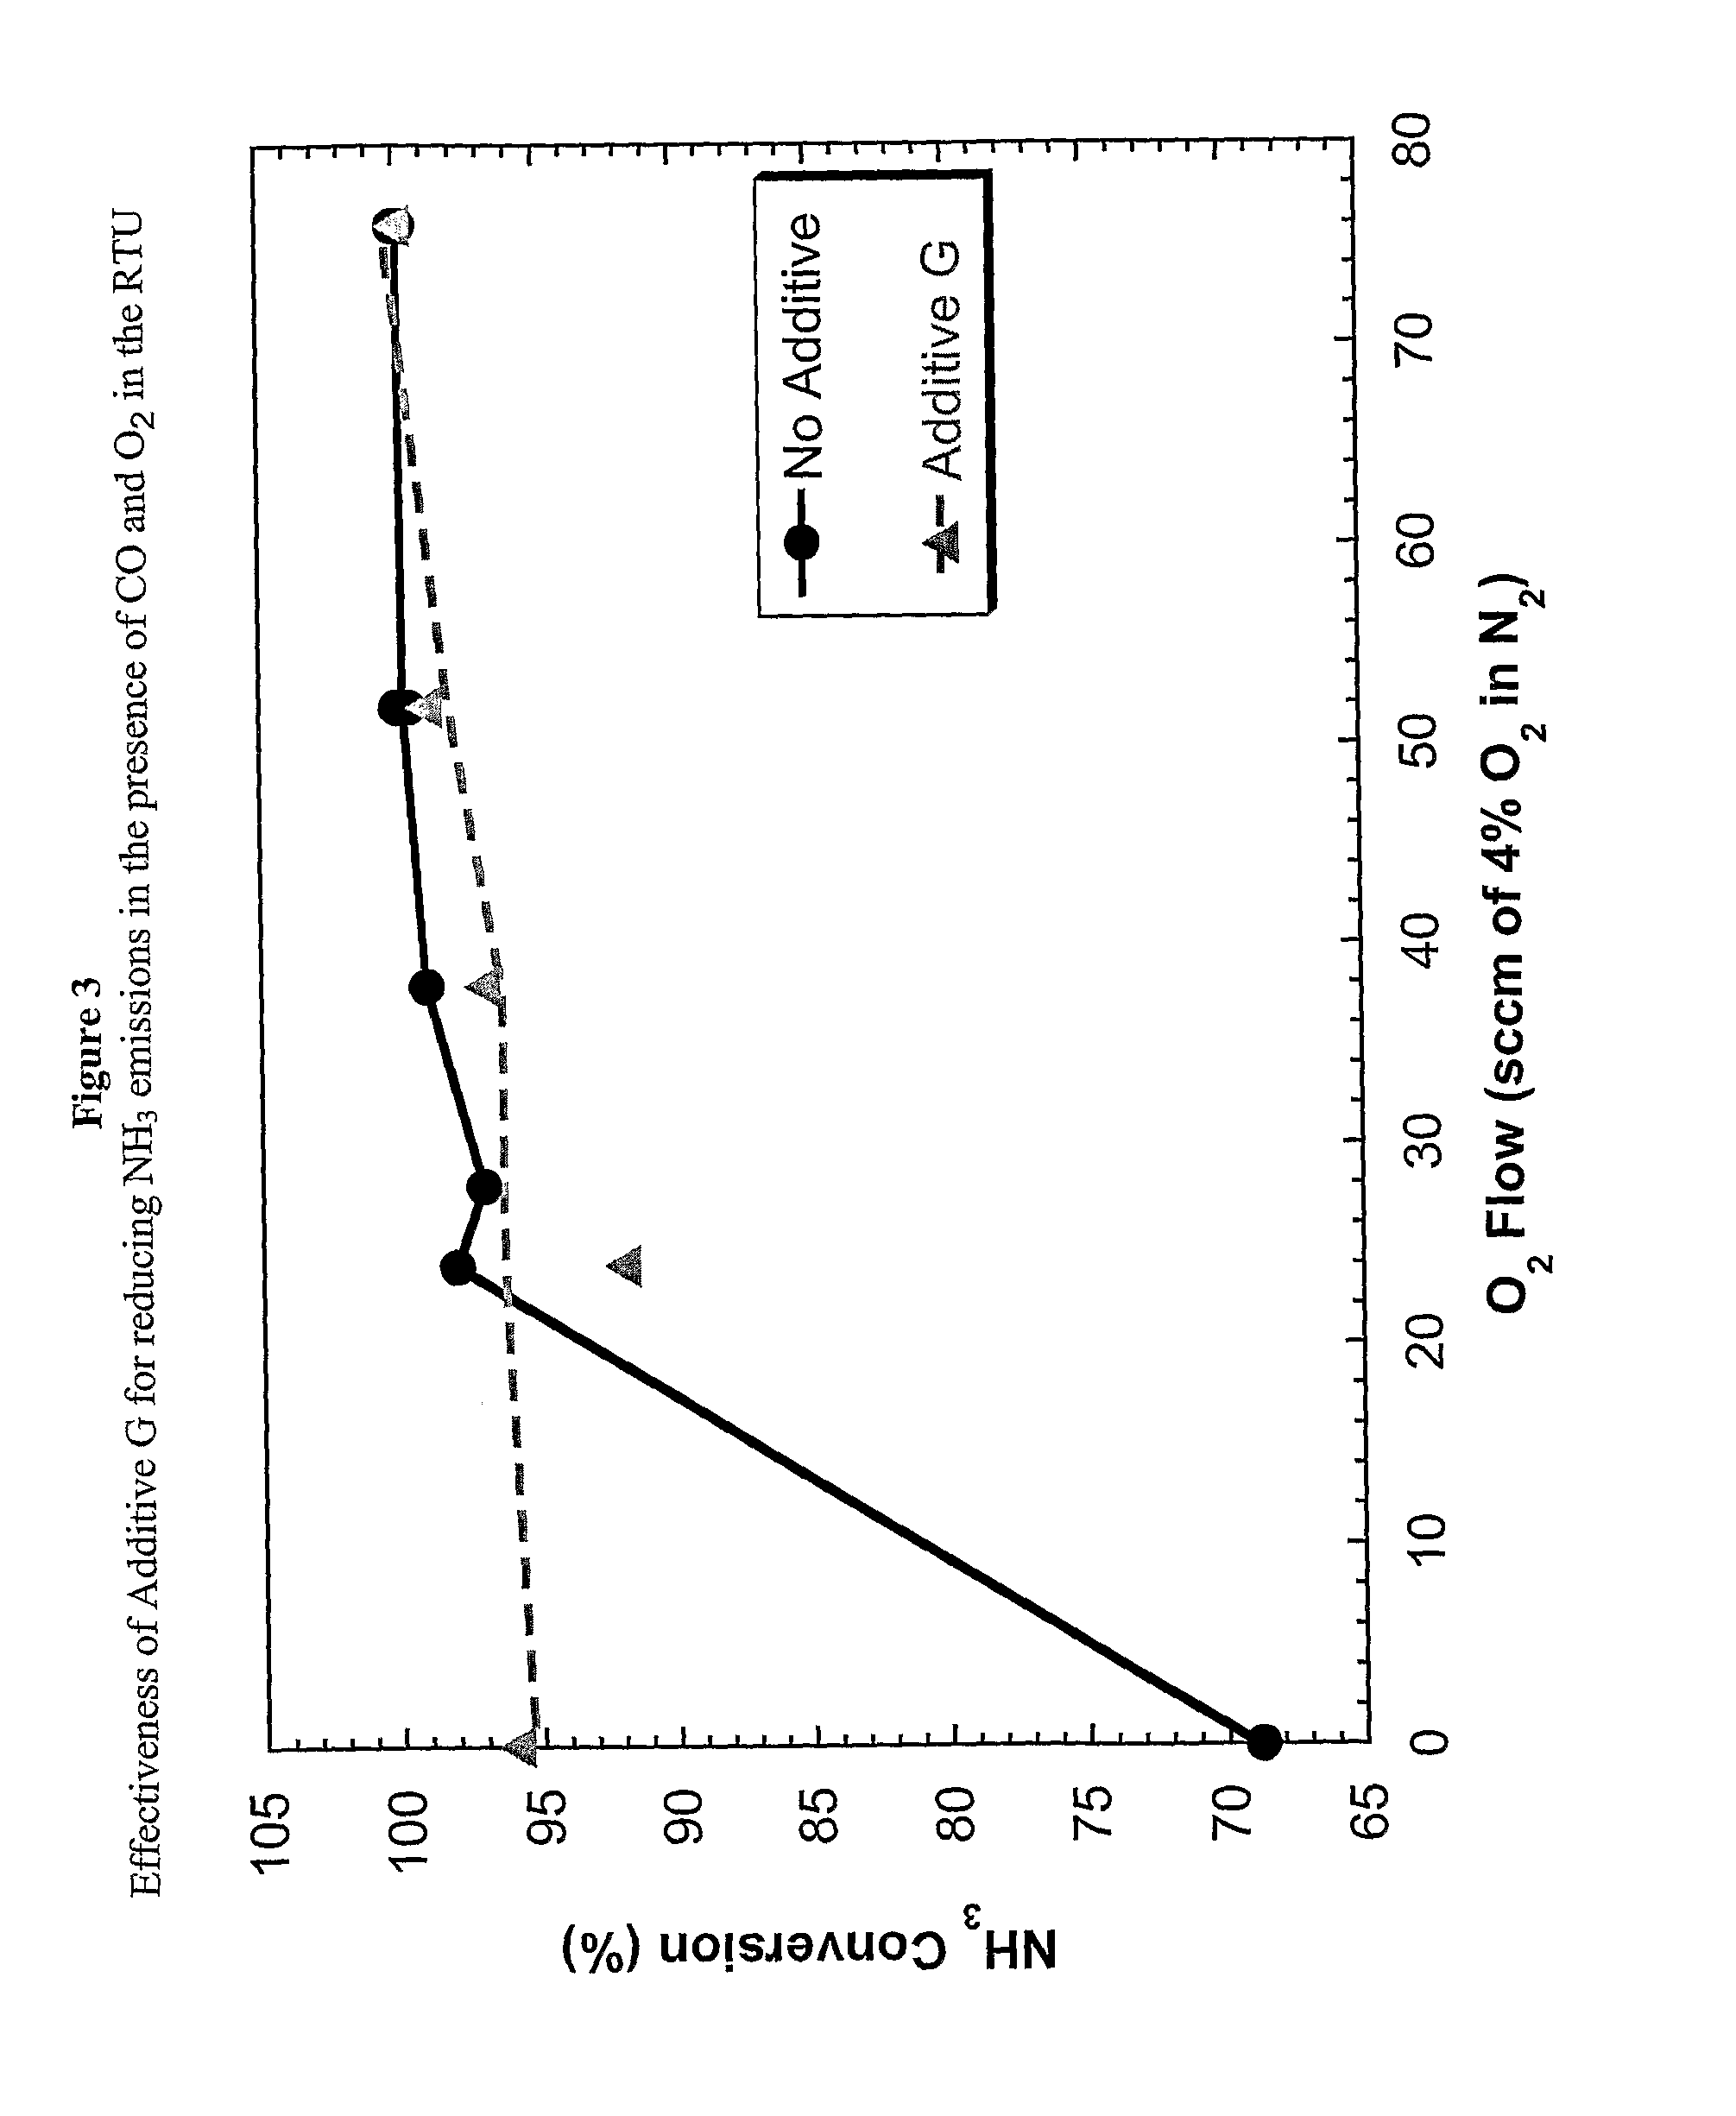 Method for Controlling Nox Emissions in the Fccu